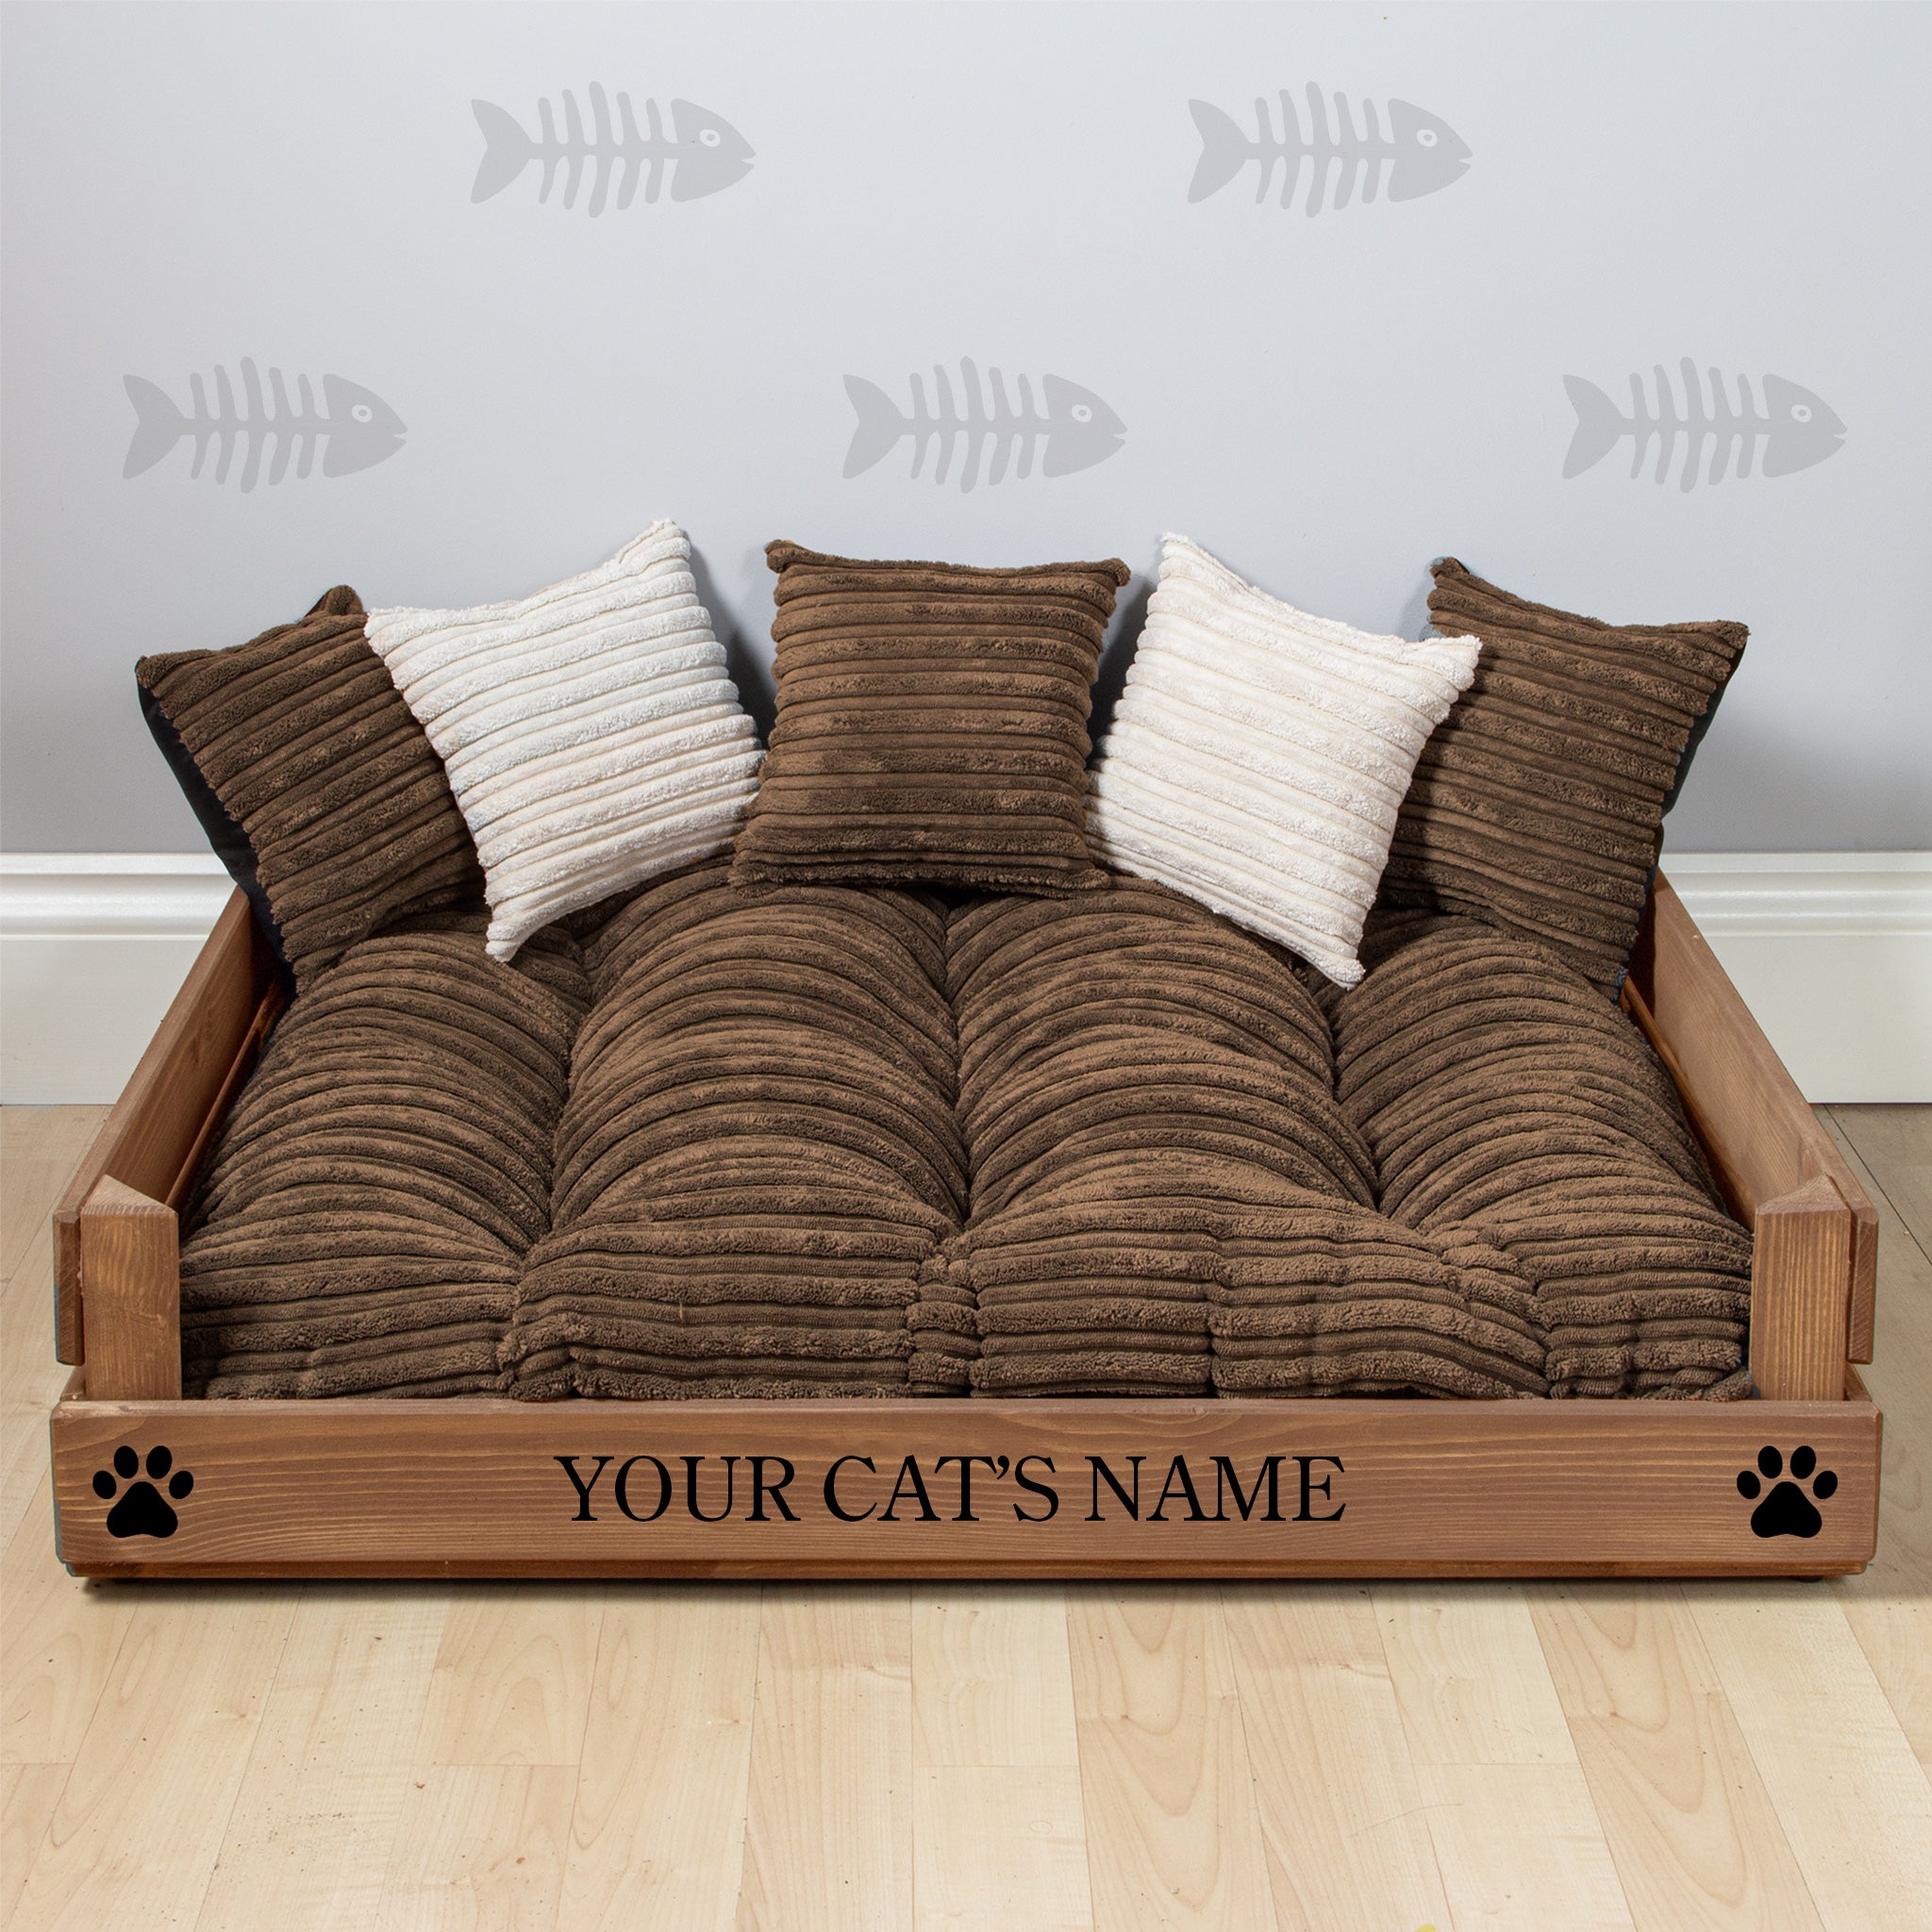 Wooden Personalised Cat Bed - Two Cats (59 x 76cm) - Royal Oak & Corduroy Brown